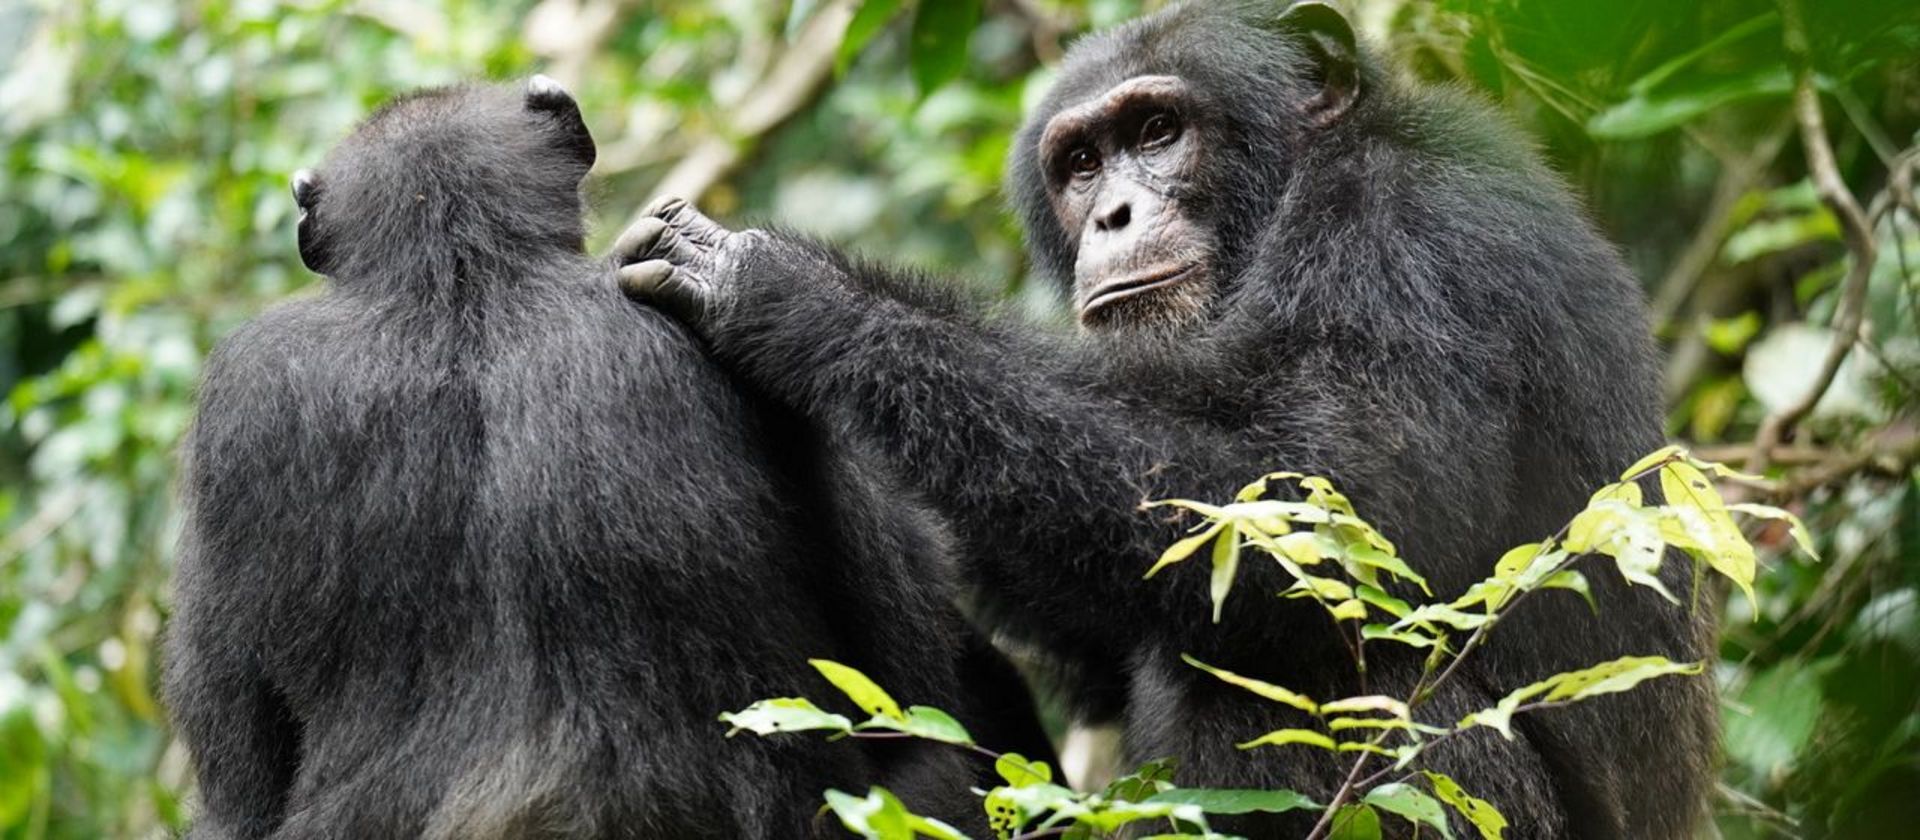 Two chimpanzees sitting next to each other